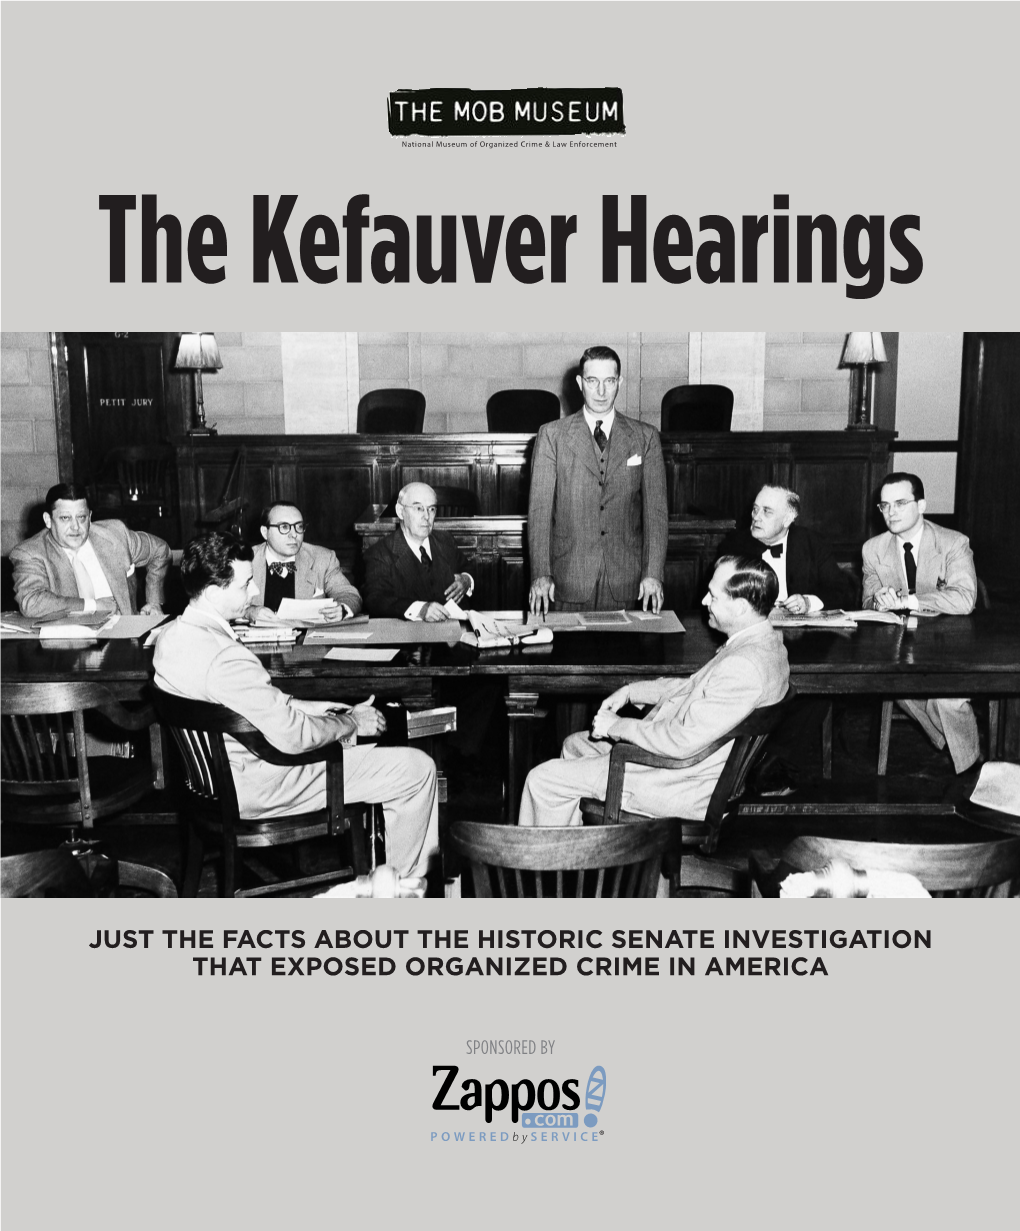 The Kefauver Hearings